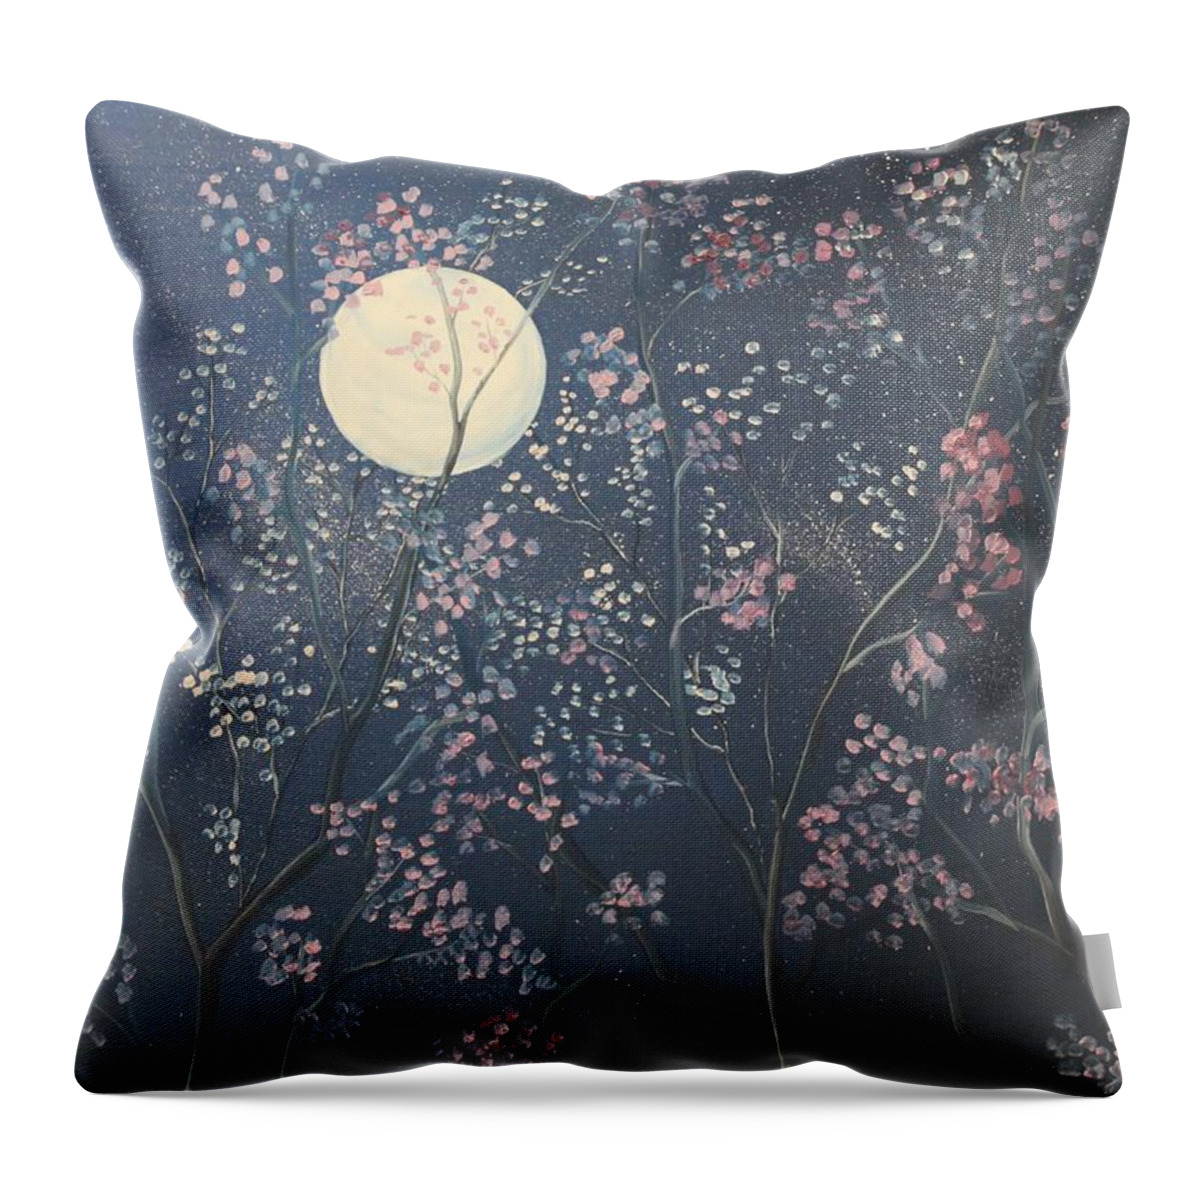 Flowers Throw Pillow featuring the painting Starlit Blossoms by Berlynn